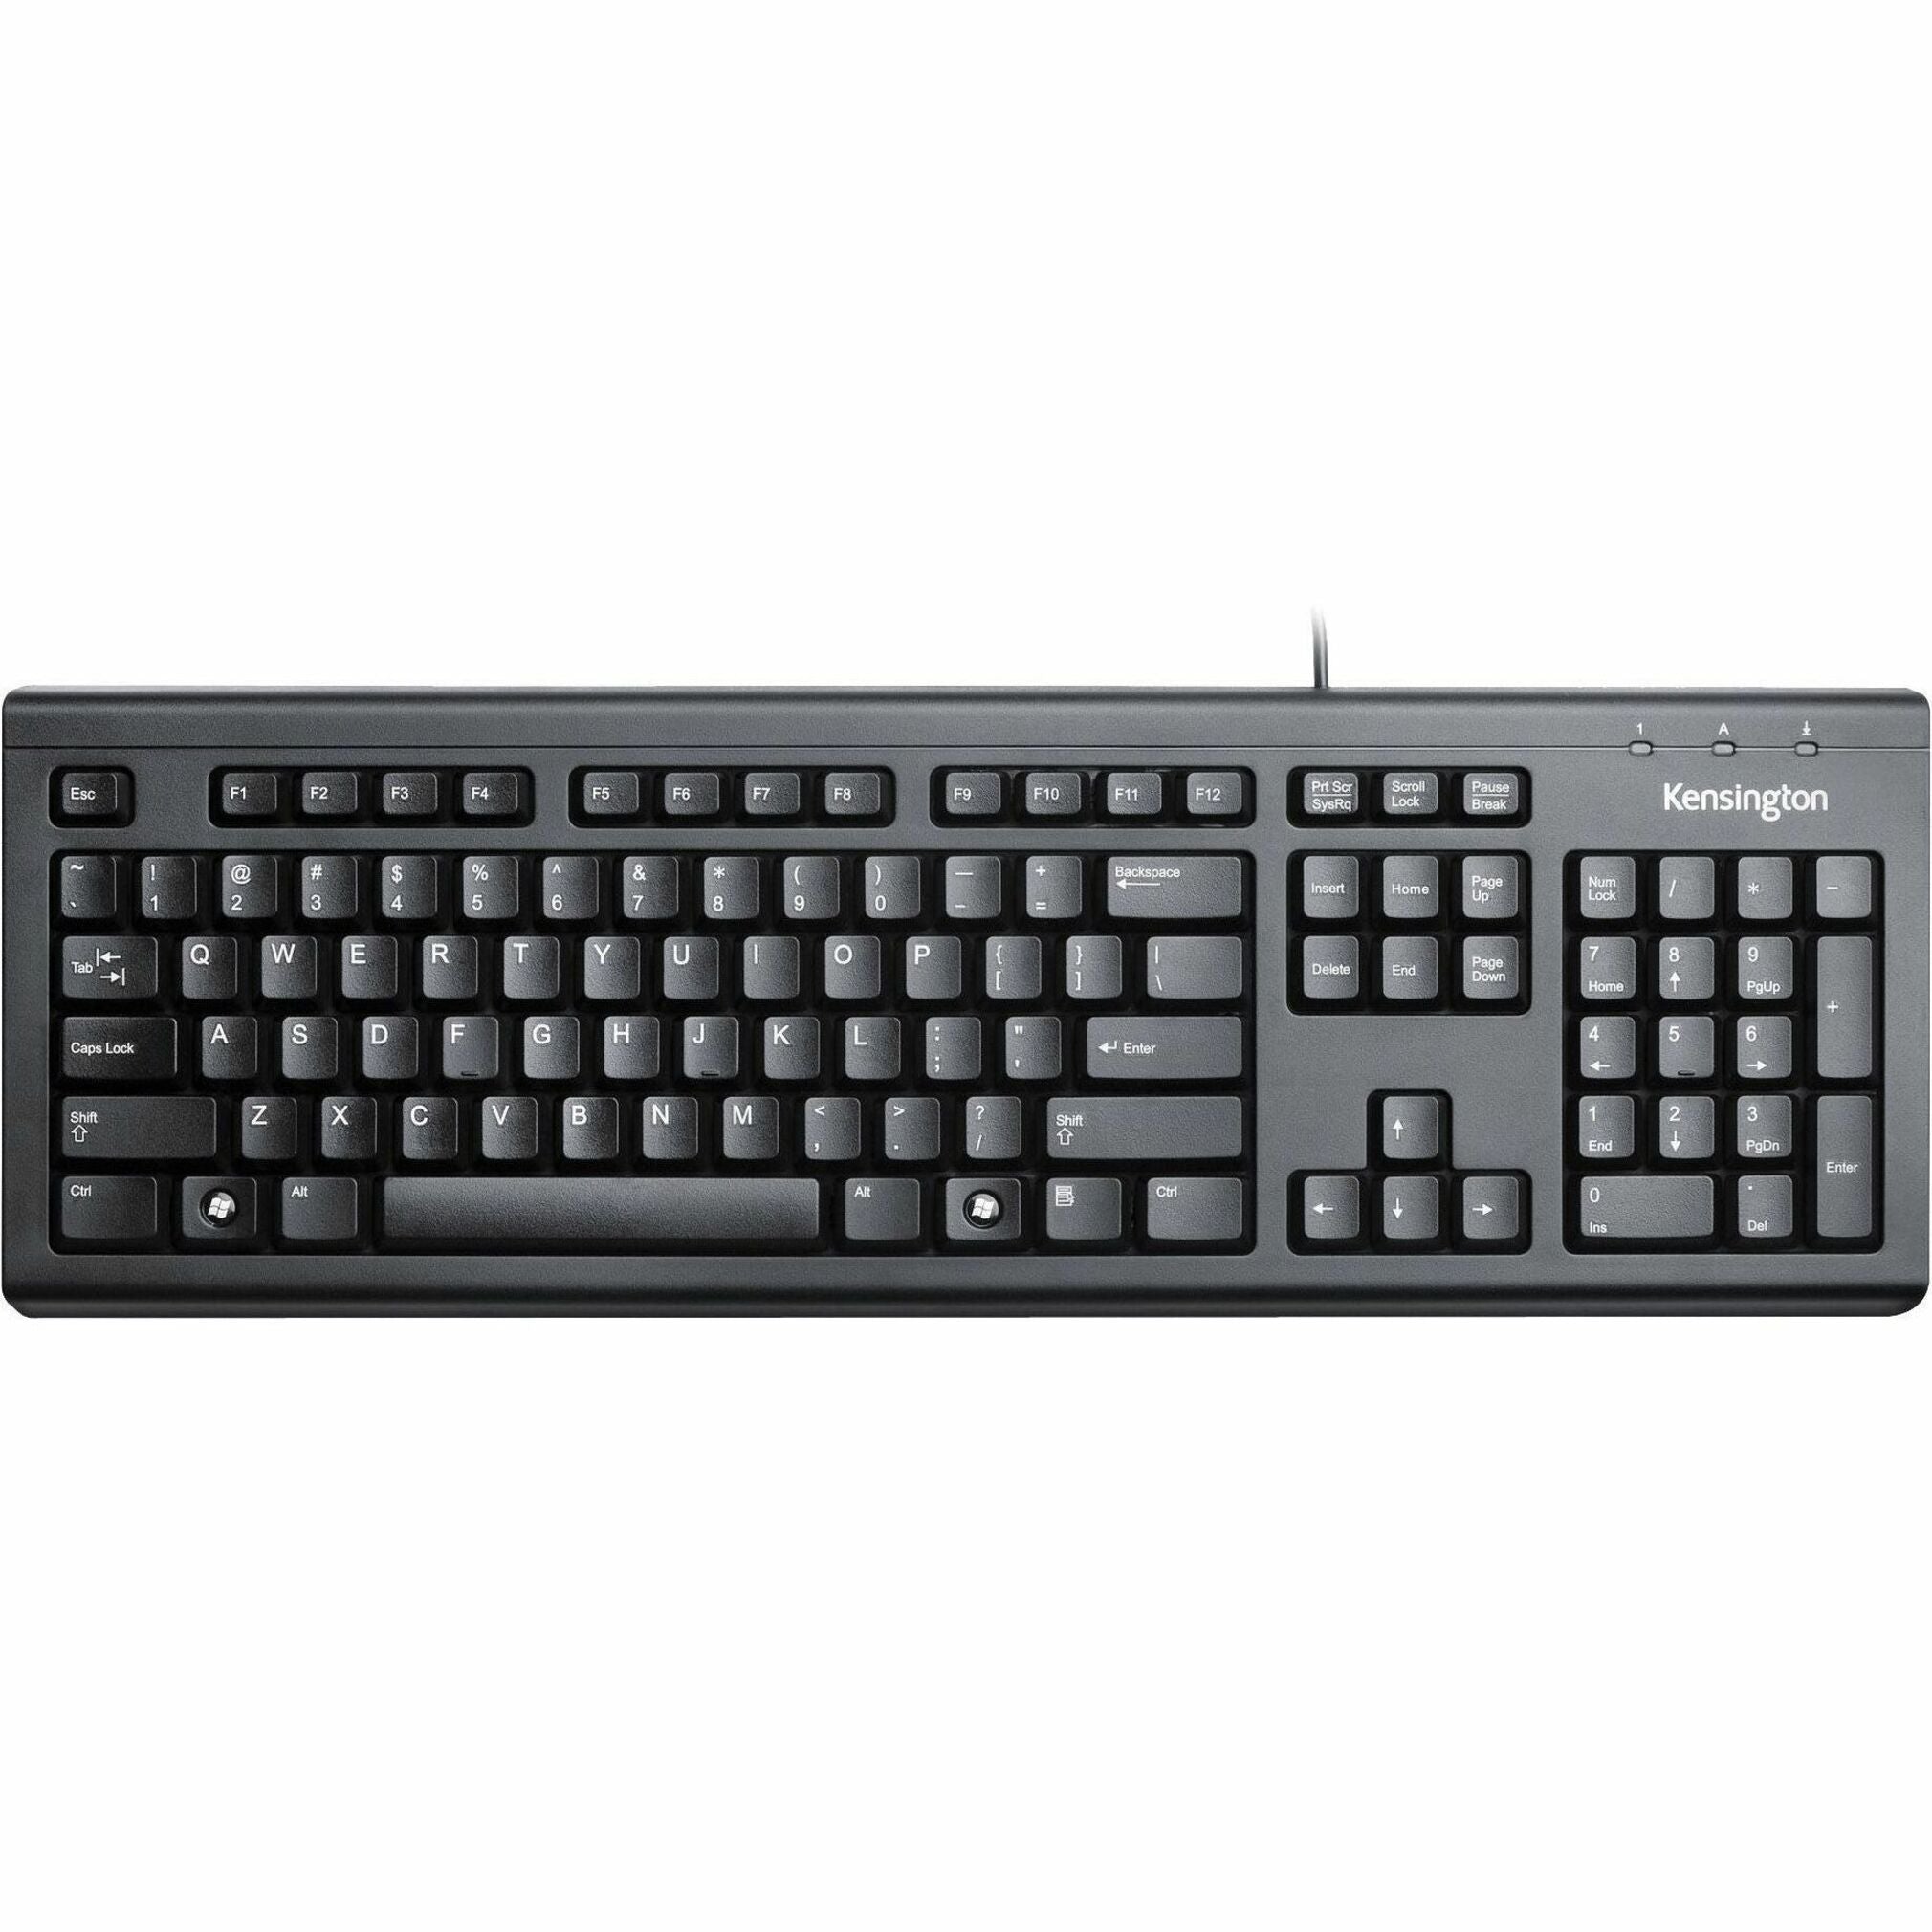 Kensington K64370A Keyboard for Life, Spill Proof, USB Cable, Black